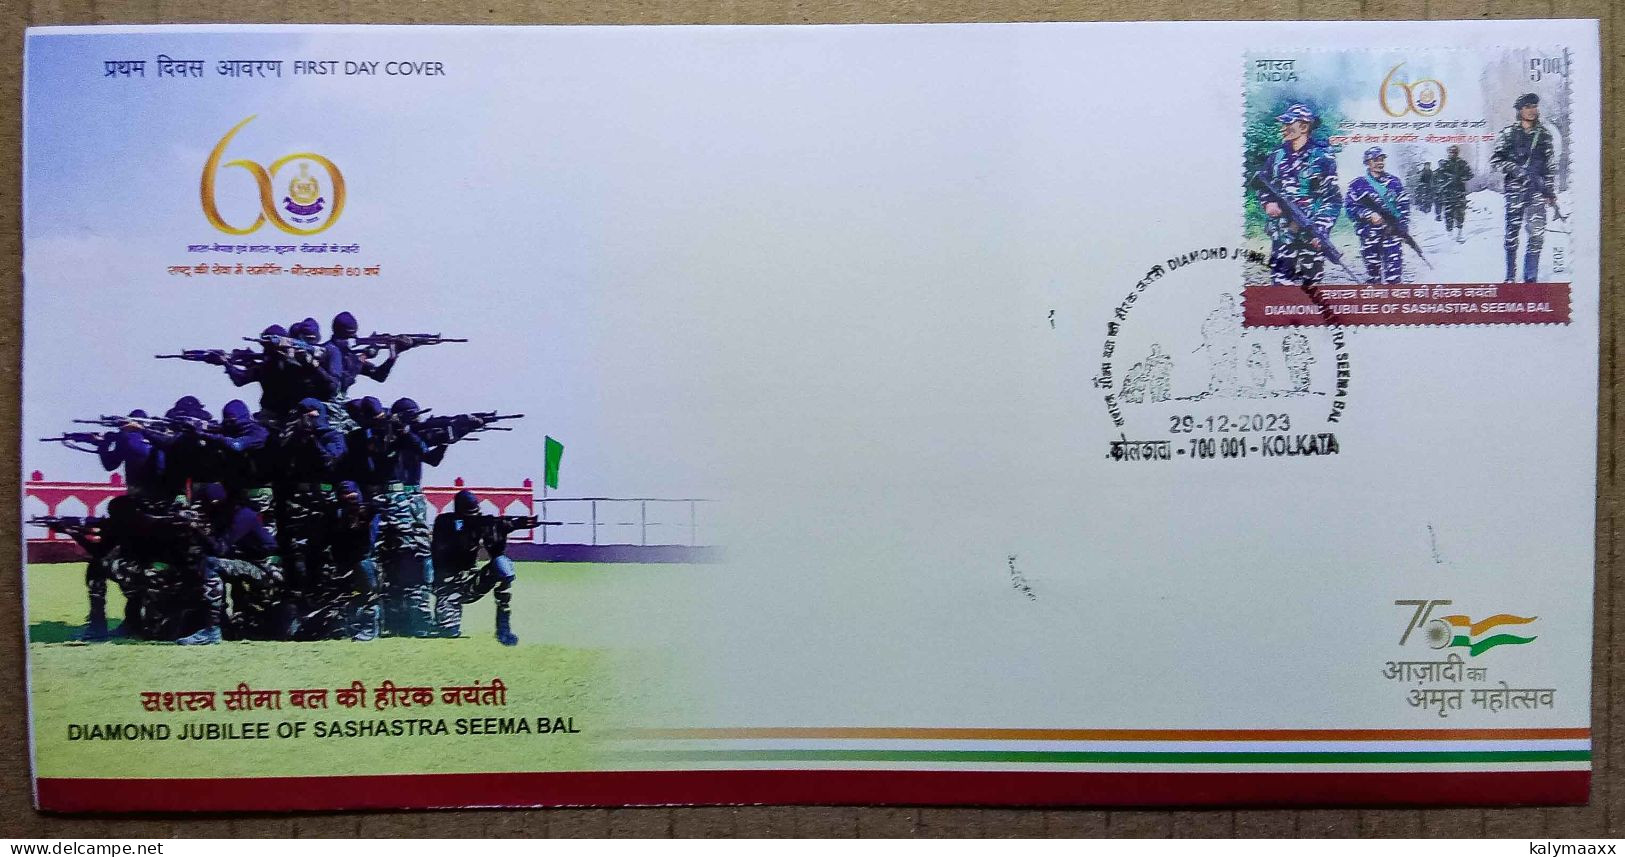 INDIA 2023 COMPLTE FDC YEAR PACK, SINGLE STAMP FDC AND MS FDC, TOTAL 48 FDC, LIST INCLUDED WITH ALL PICTURES